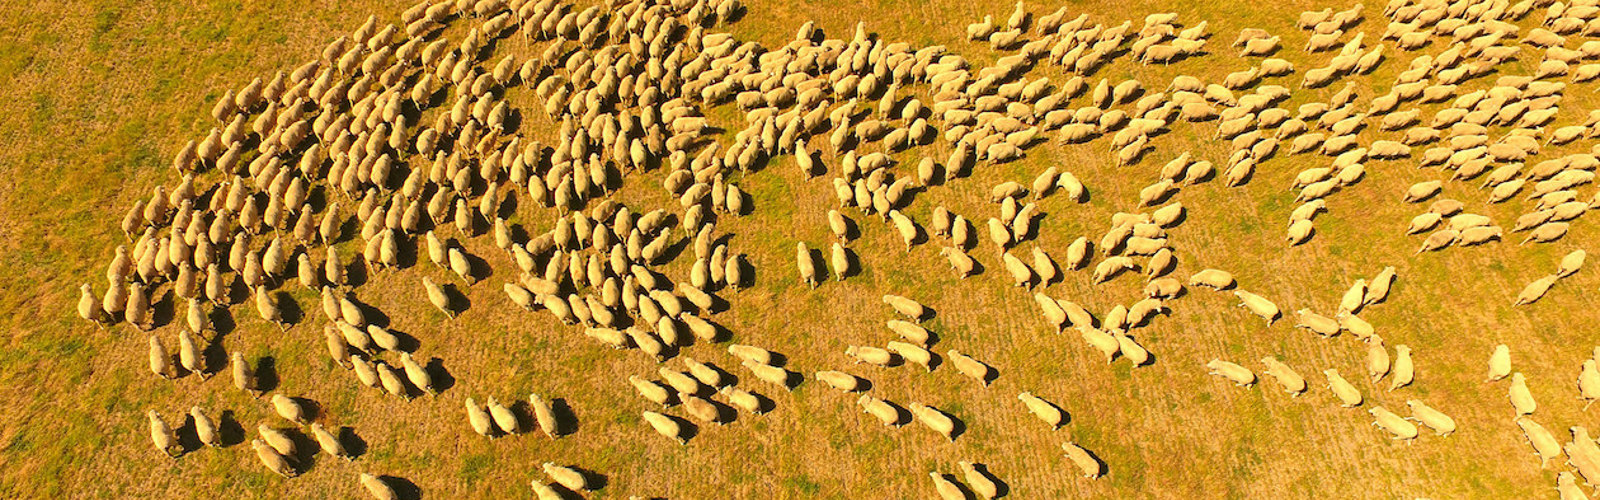 Aerial view of a herd of sheep in the Australian outback